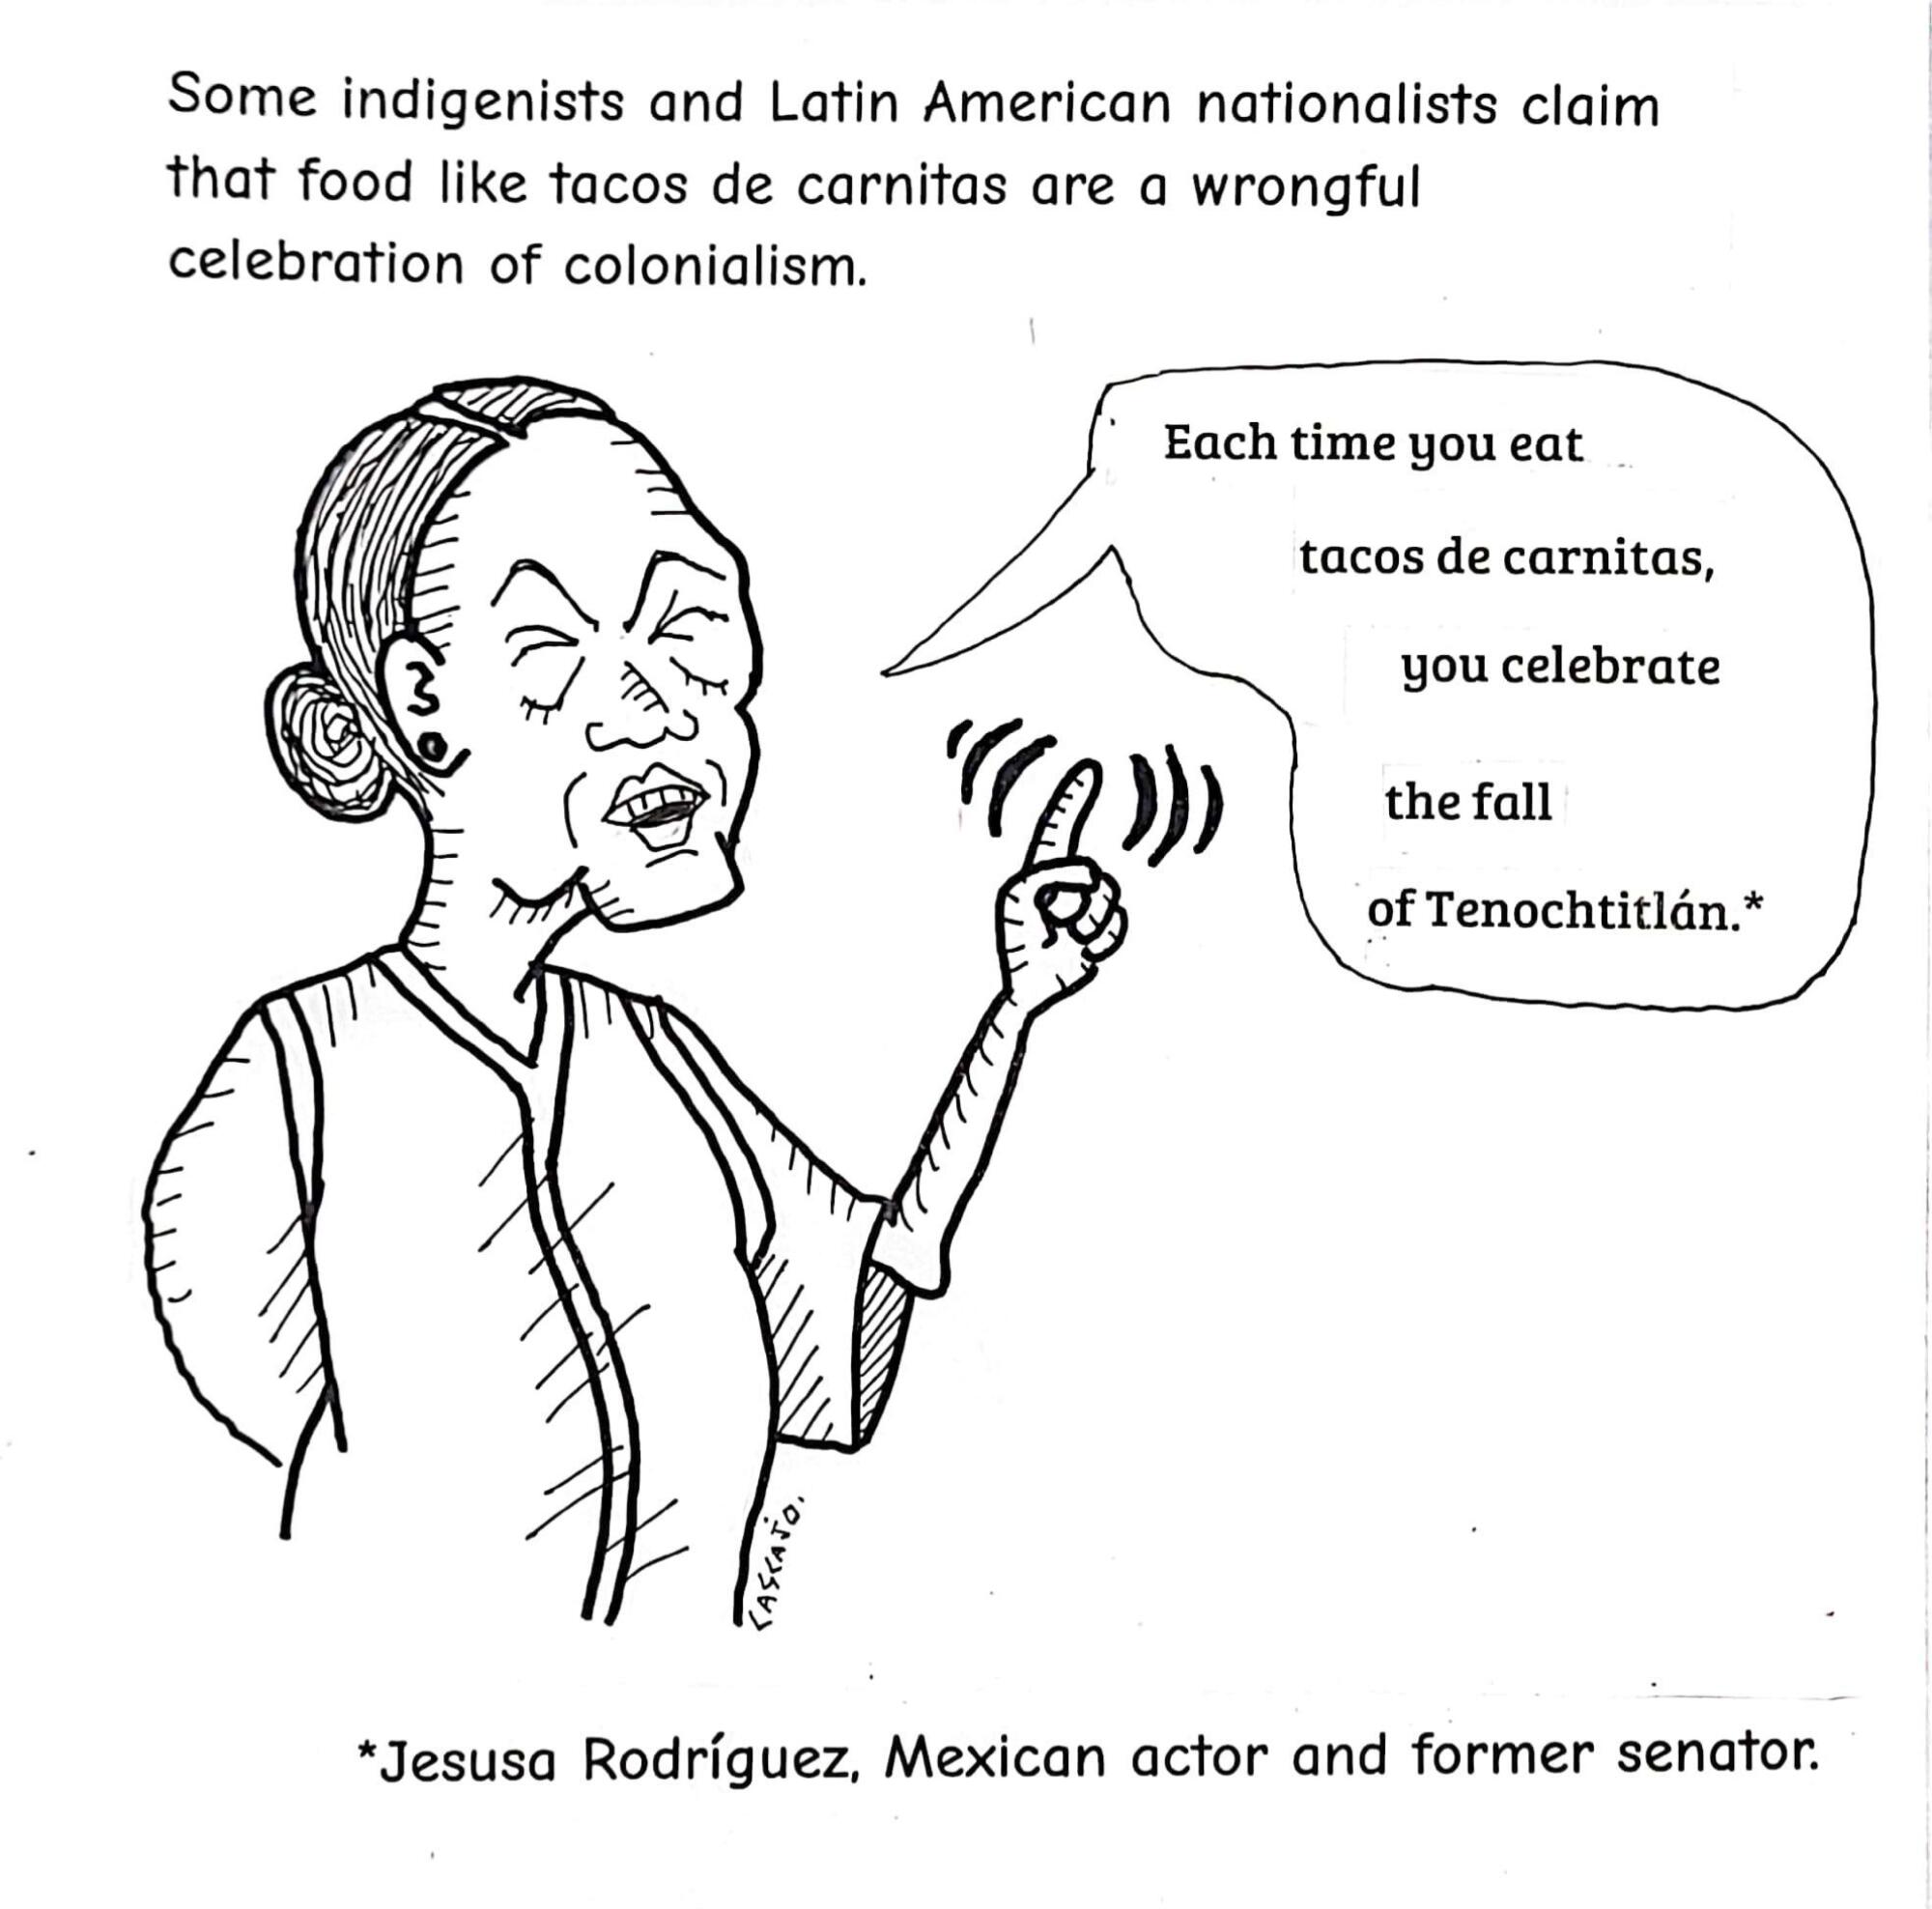 Some radical Latin American nationalists claim that food like tacos de carnitas are a wrongful celebration of colonialism. 